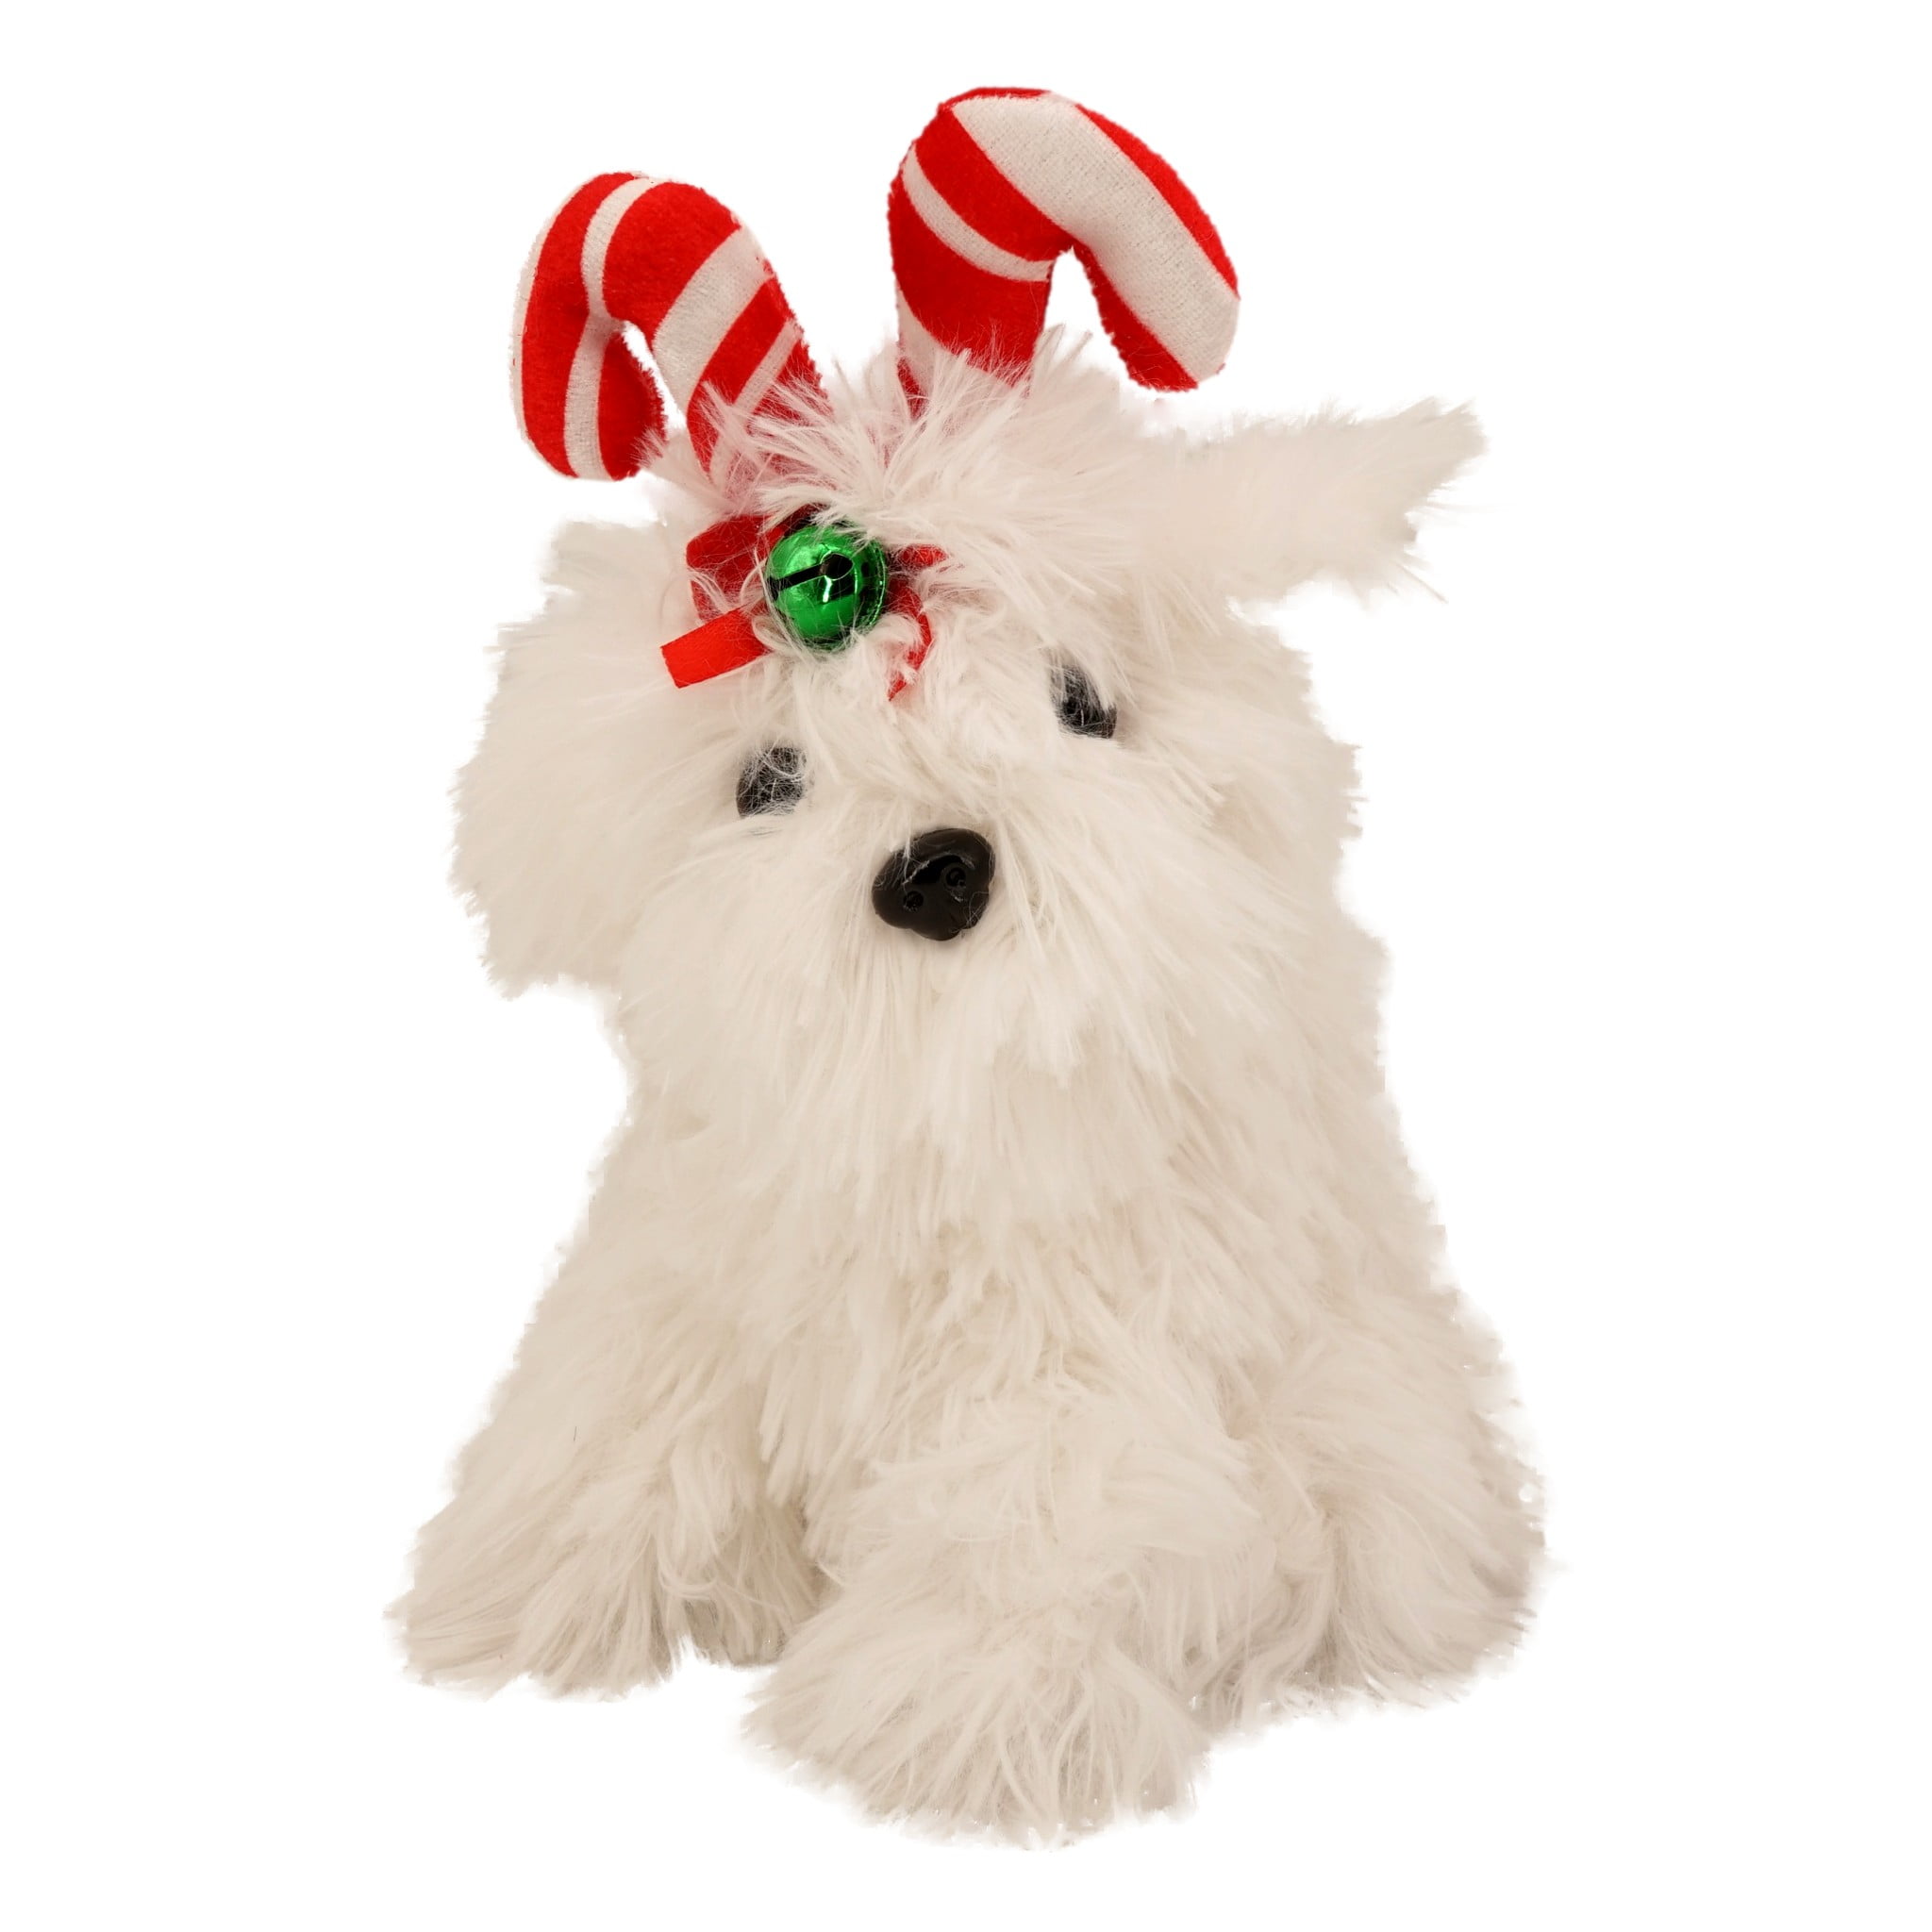 Details about   DanDee Dancing Spinning Animated Christmas Jingle Bell Puppy Dog  New With Tags 